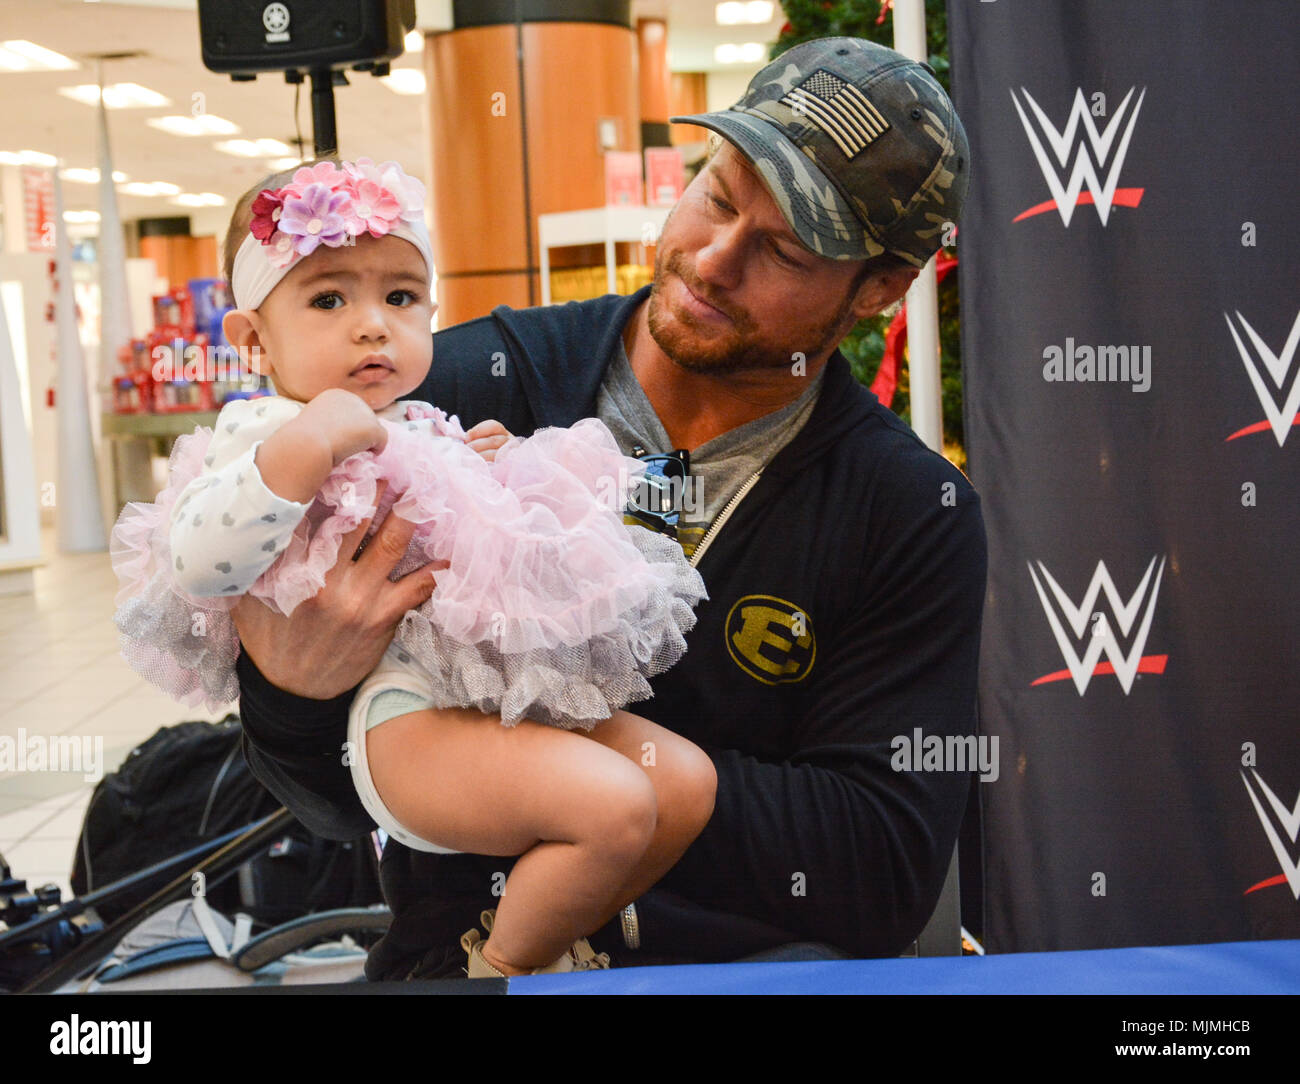 20171205-N-ZO368-030 CORONADO, Calif. (Dec. 5, 2017) WWE superstar Dolph Ziggler poses for a photo at the Navy Exchange onboard Naval Base Coronado during a Tribute to the Troops event. Tribute to the Troops is an annual event held by WWE and Armed Forces Entertainment in December during the holiday season since 2003, to honor and entertain United States Armed Forces members. U.S. Navy photo by Mass Communication Specialist 1st Class Travis Alston (Released) Stock Photo